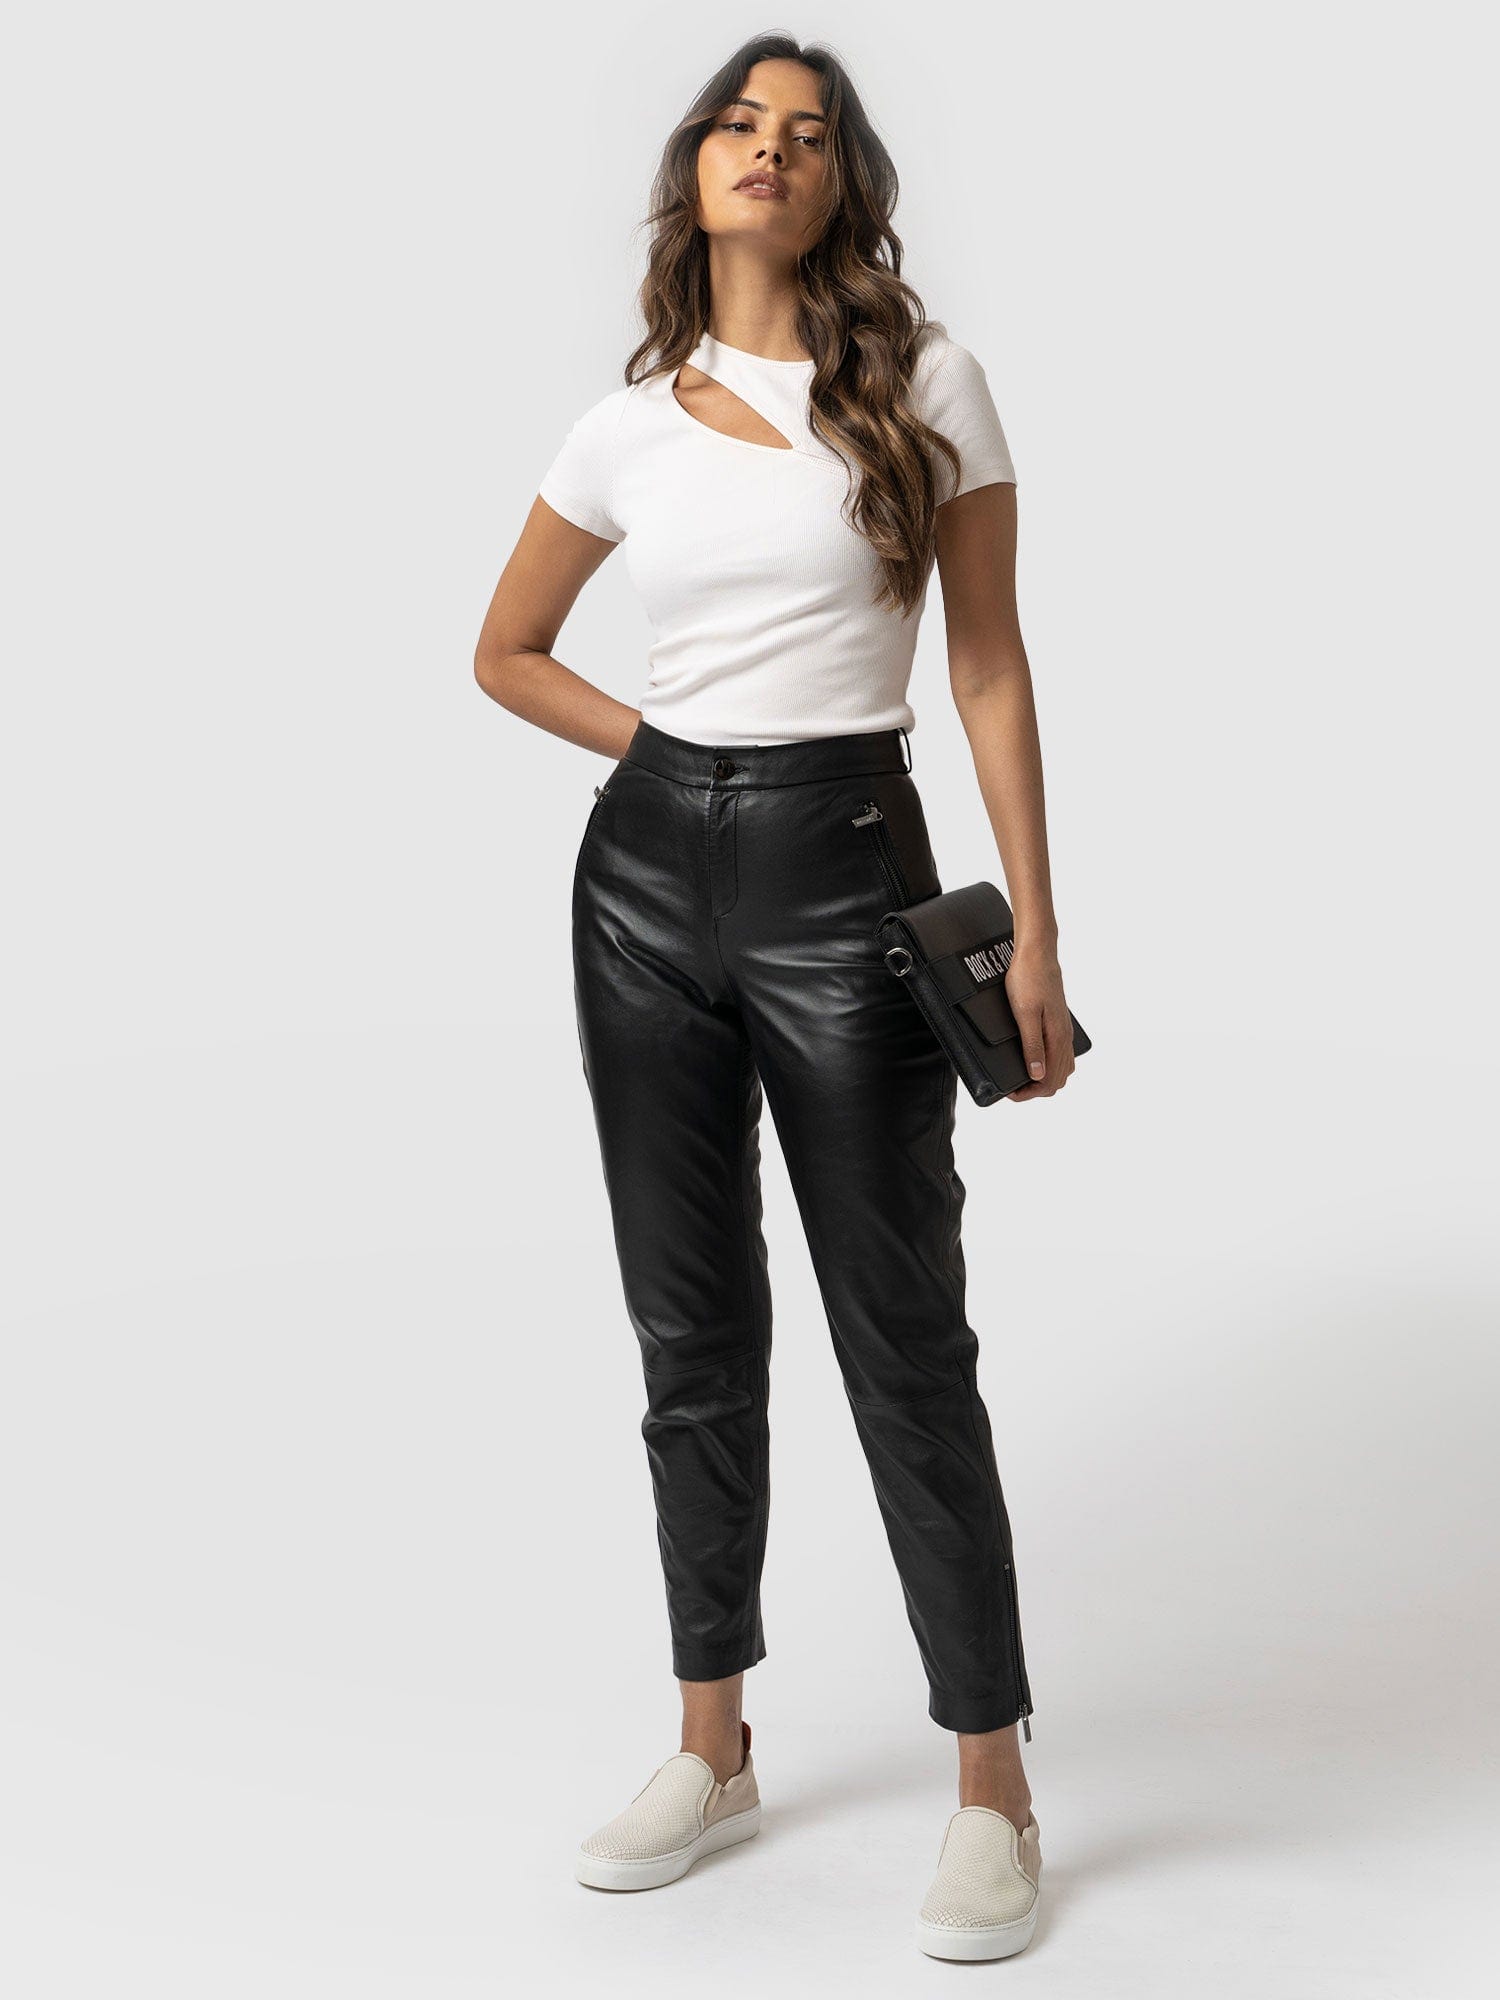 The leather trouser trend: Why the look of midlife crises and Theresa May  is everywhere | Women's trousers | The Guardian